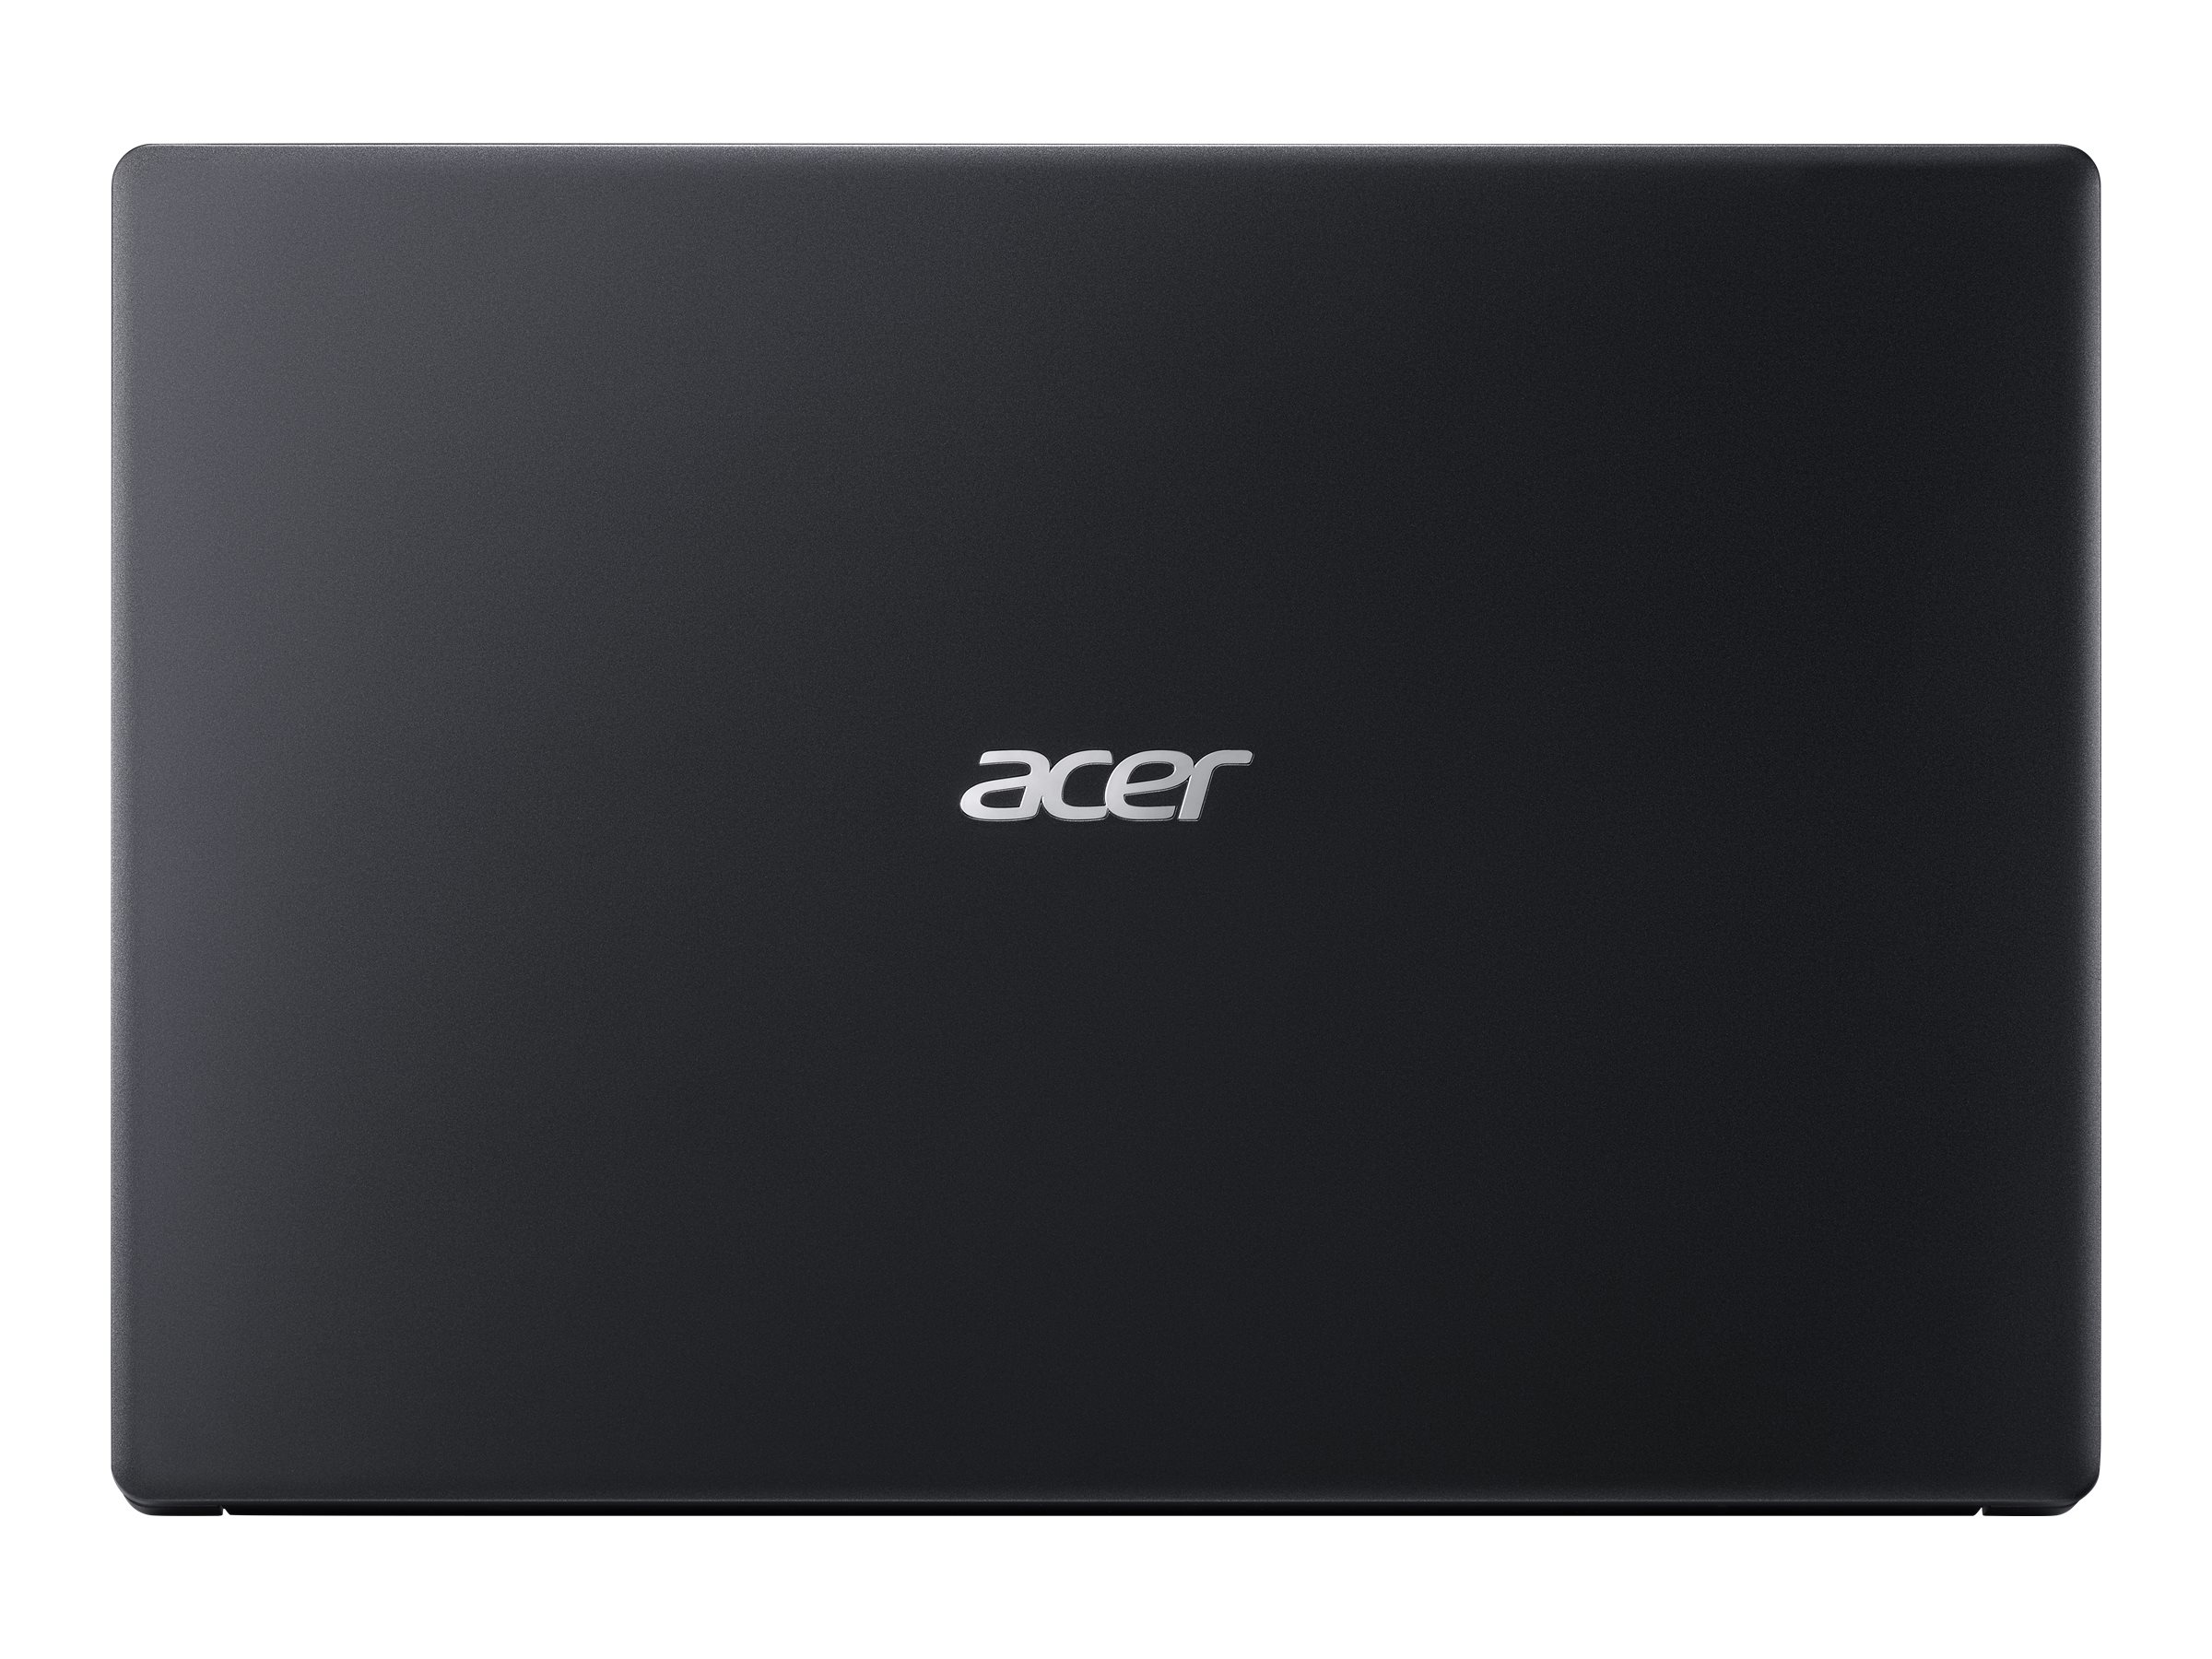 Restored Acer Aspire 1 A115-31-C2Y3, 15.6" Full HD Display, Intel Celeron N4020, 4GB DDR4, 64GB eMMC, 802.11ac Wi-Fi 5, Up to 10-Hours of Battery Life, Windows 10 in S mode, Black (Refurbished) - image 2 of 4